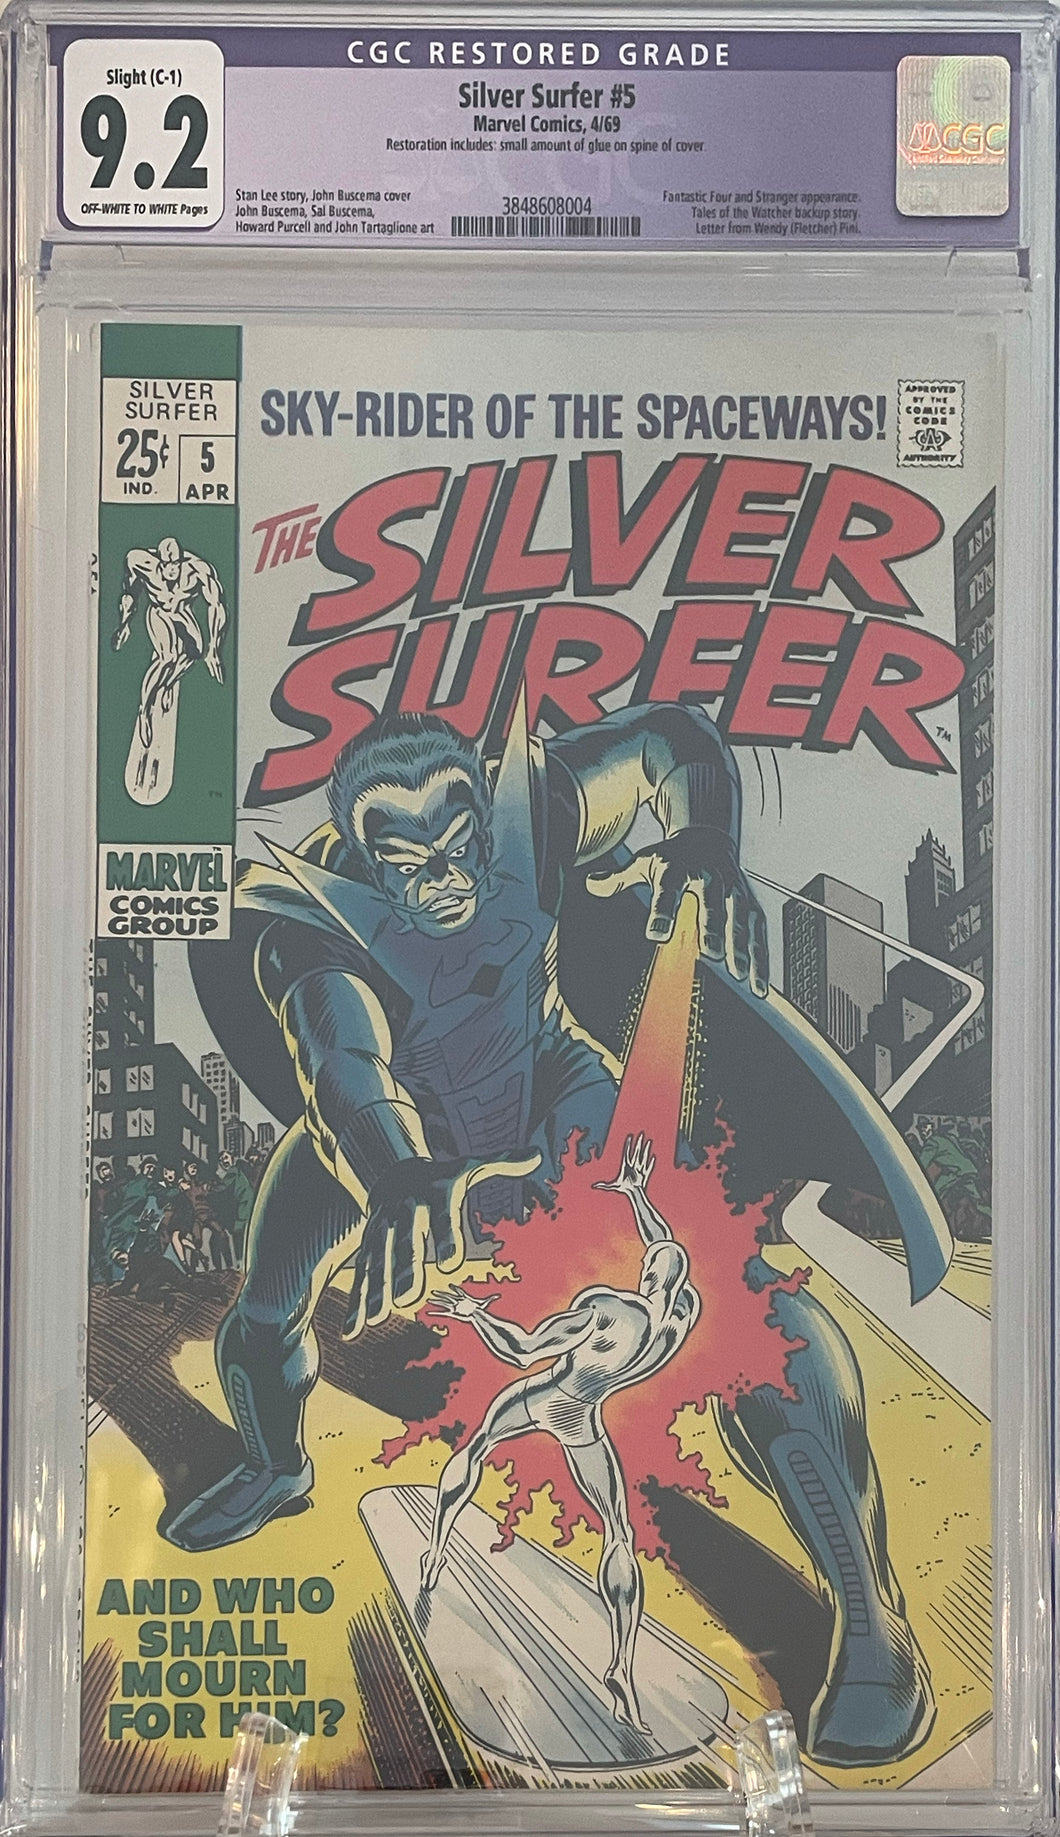 The Silver Surfer #5 CGC QUALIFIED 9.2